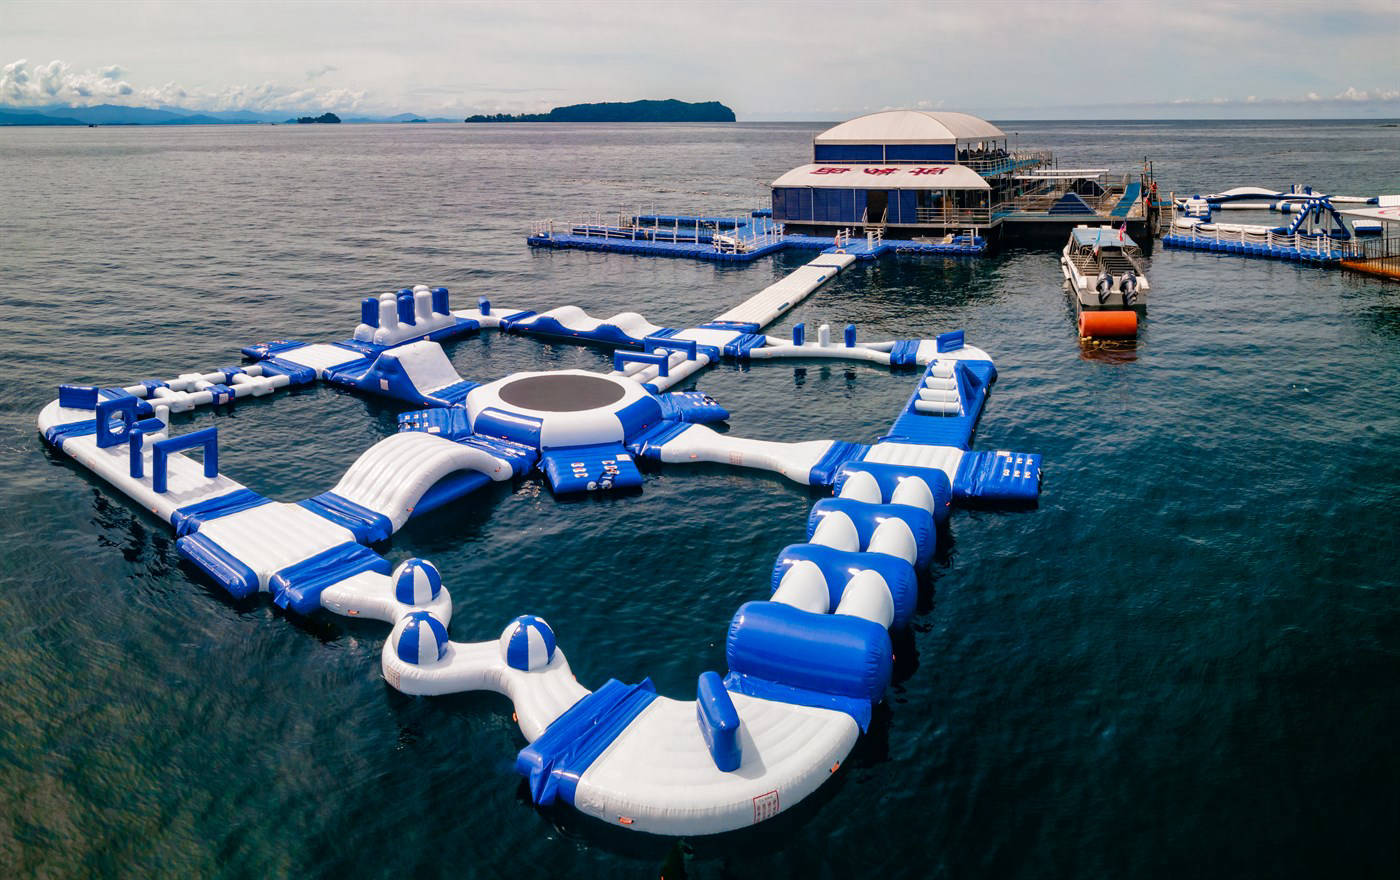 Water parks in Malaysia - JSK Borneo Reef